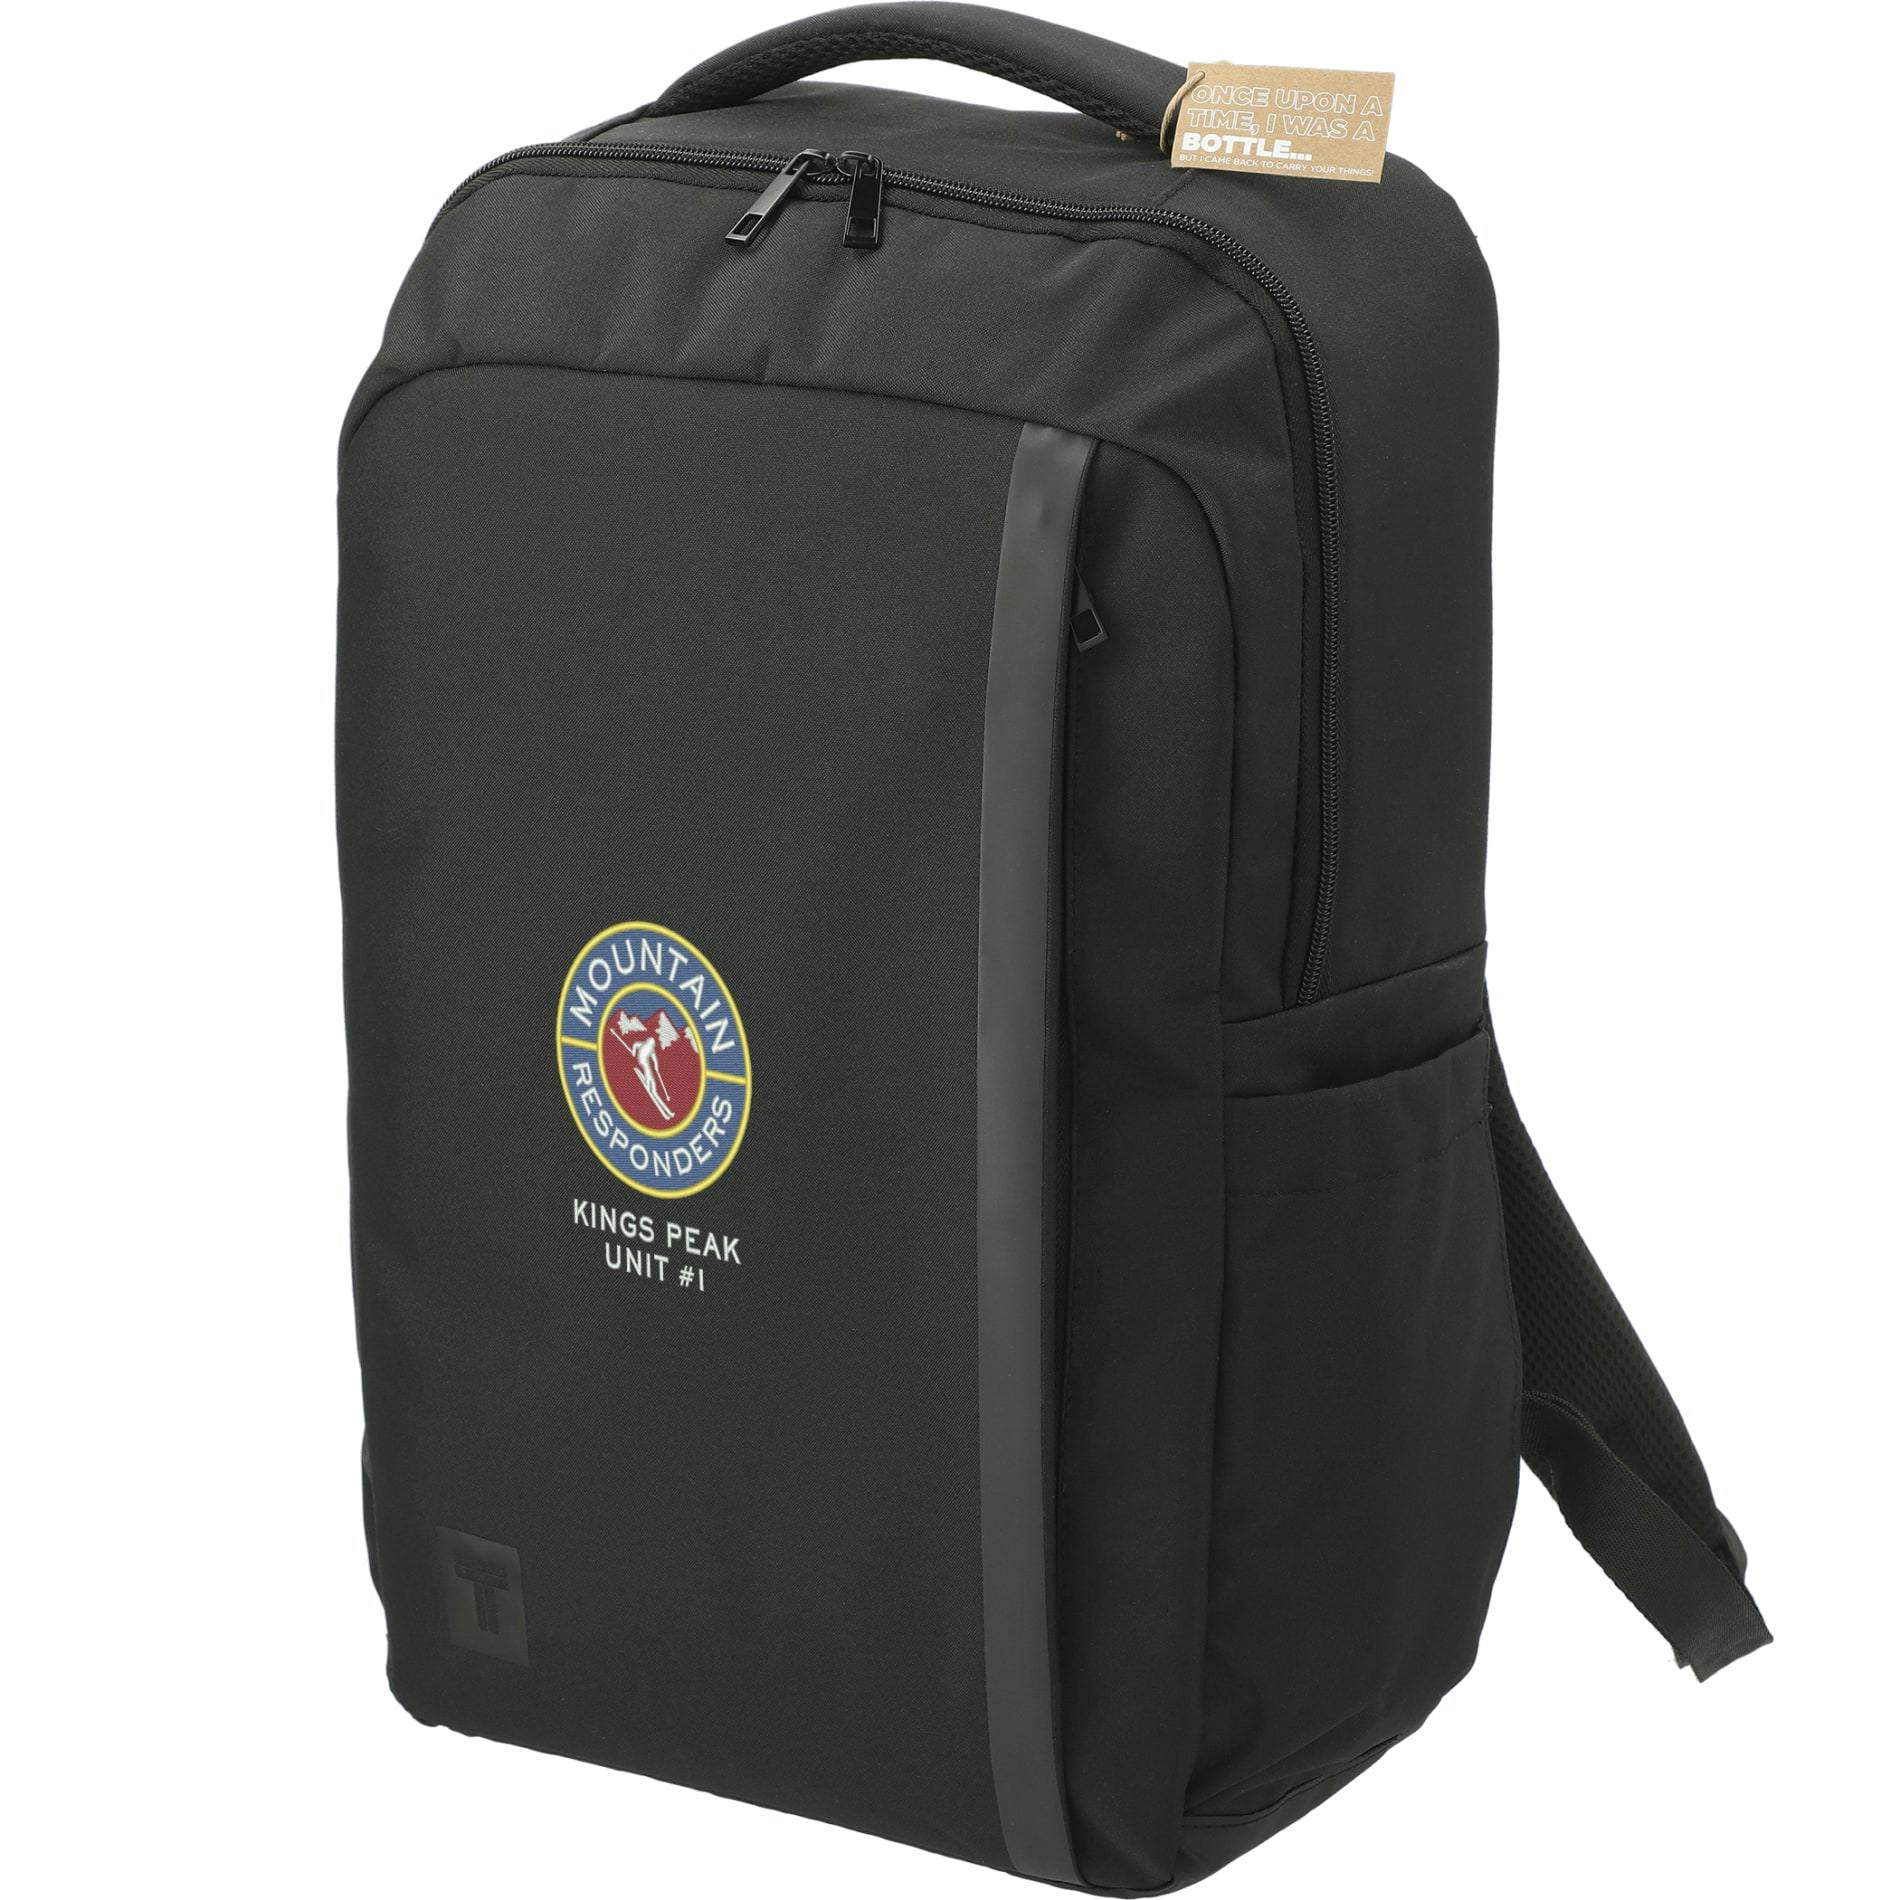 Tranzip Recycled 17" Computer Backpack - additional Image 2